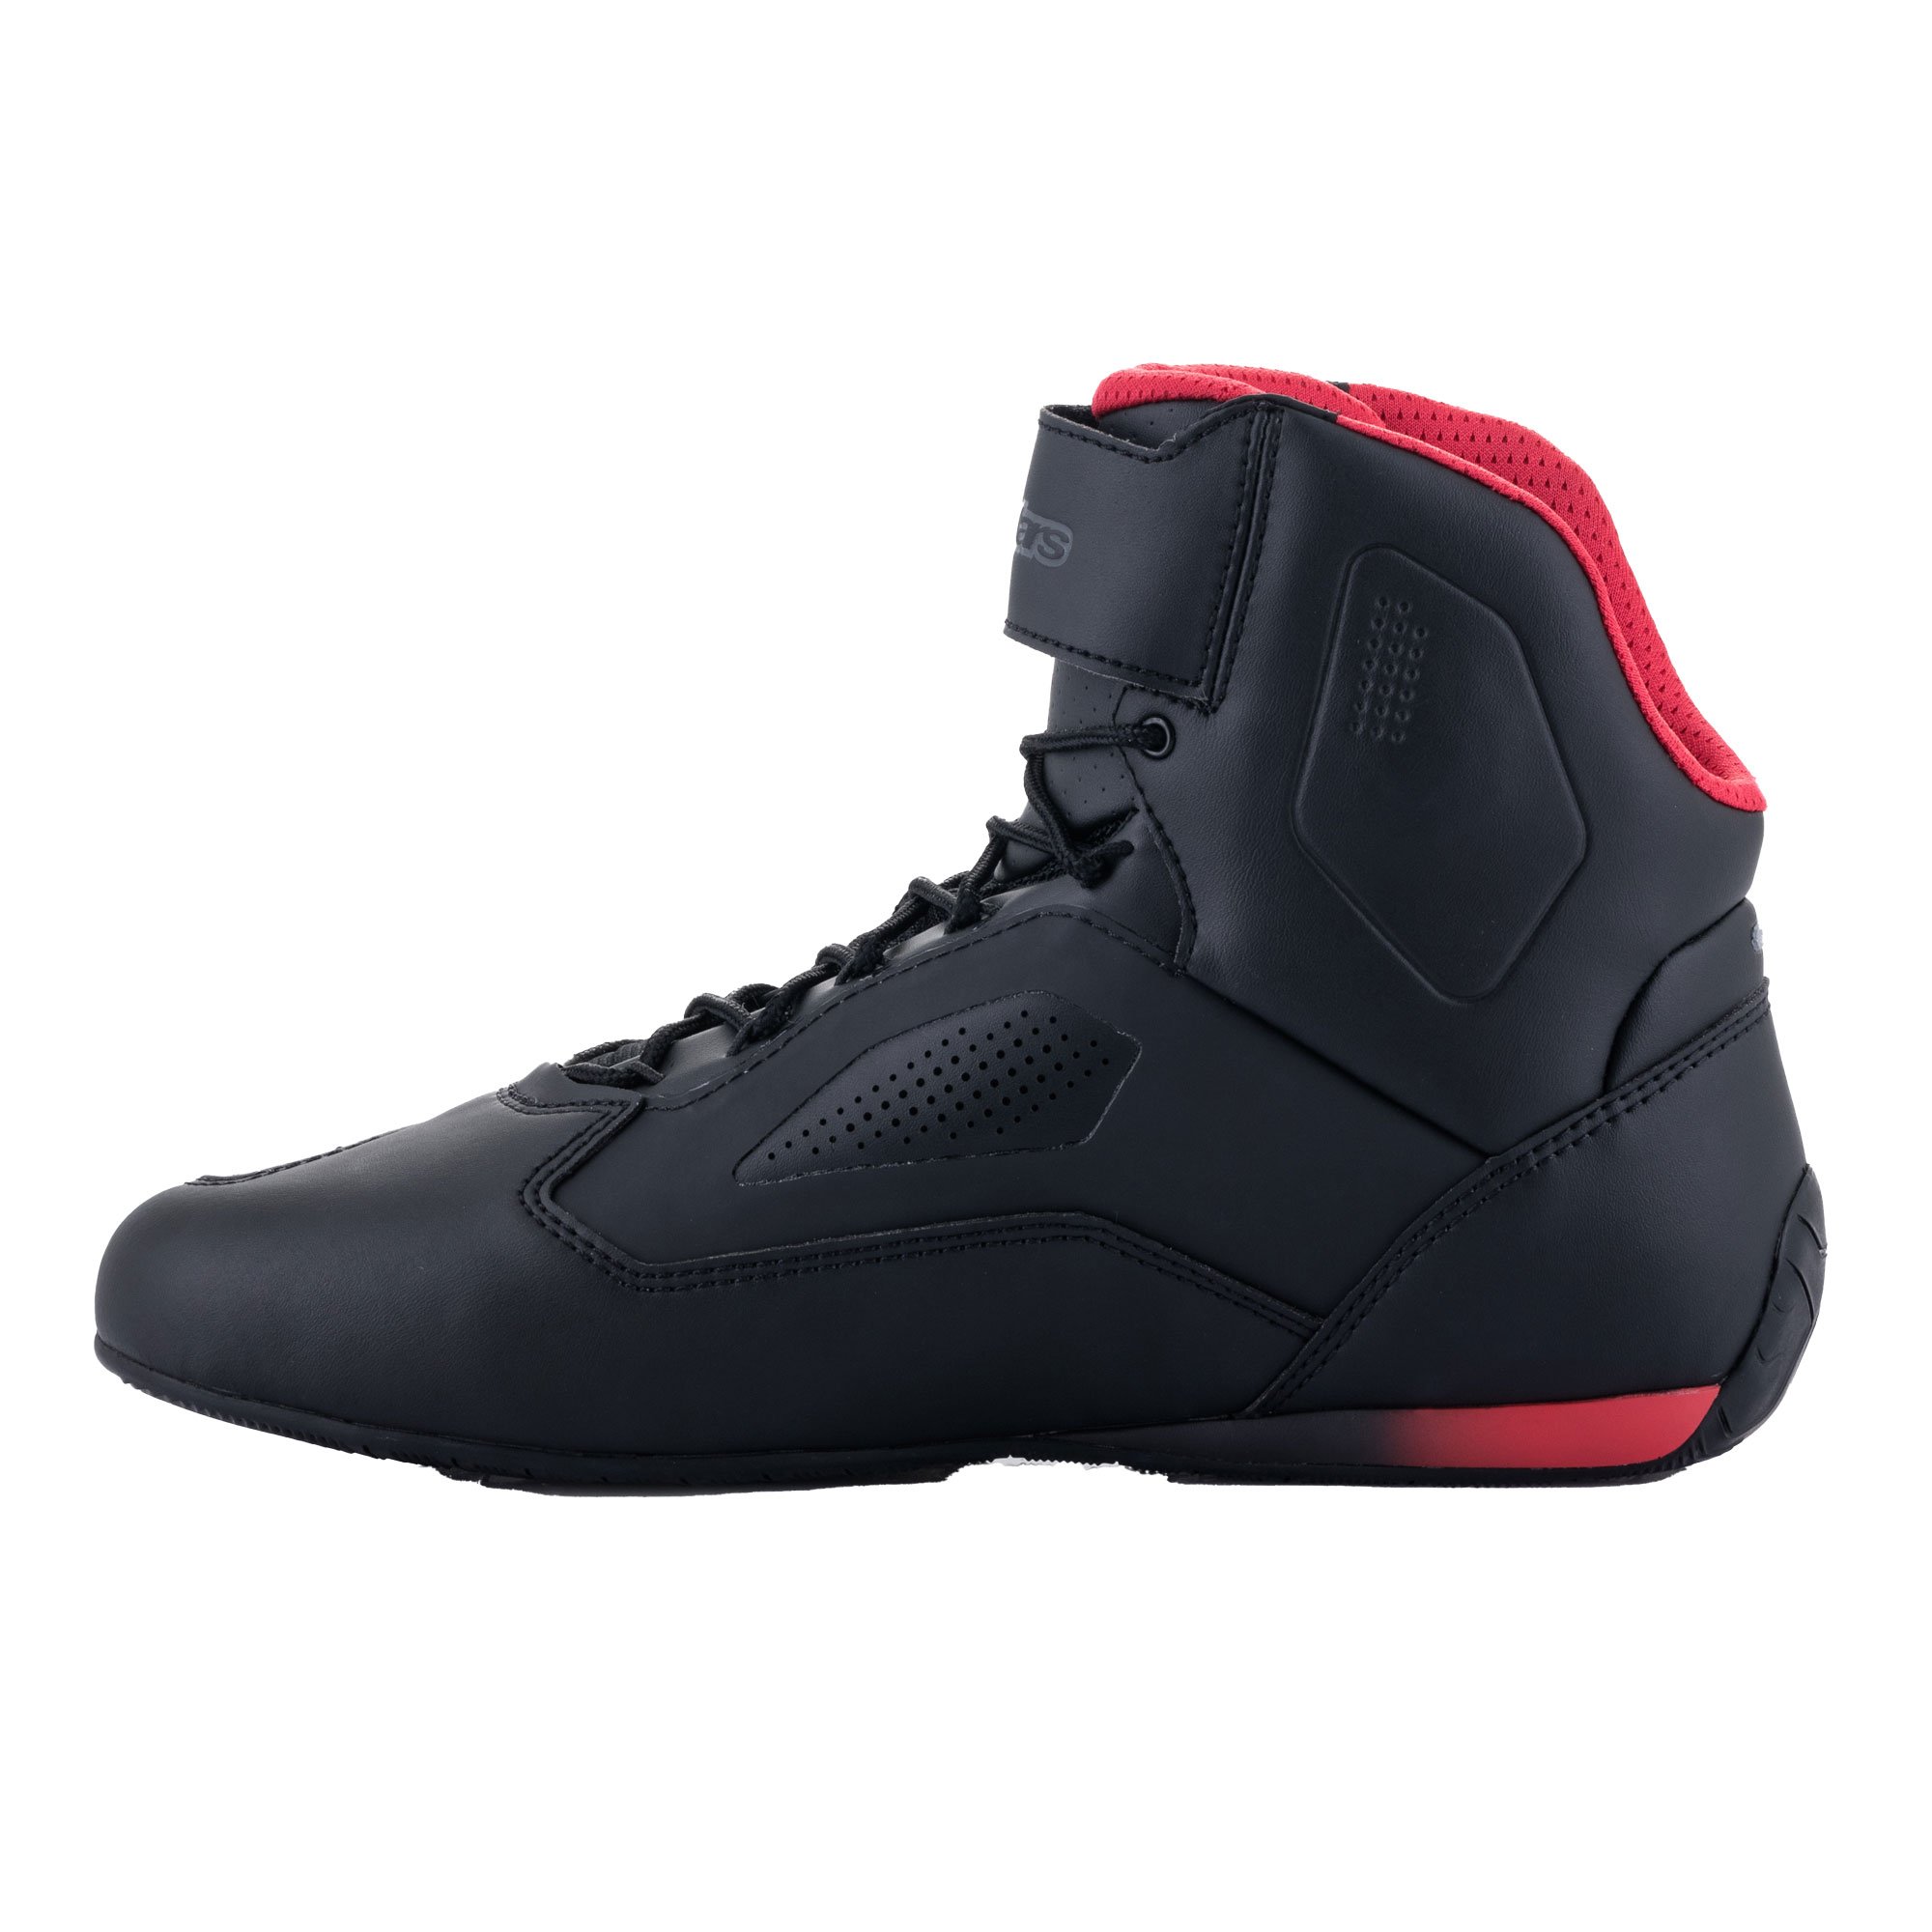 Alpinestars Faster-3 Rideknit Shoes Black Red Yell Fluo : Oxford Products